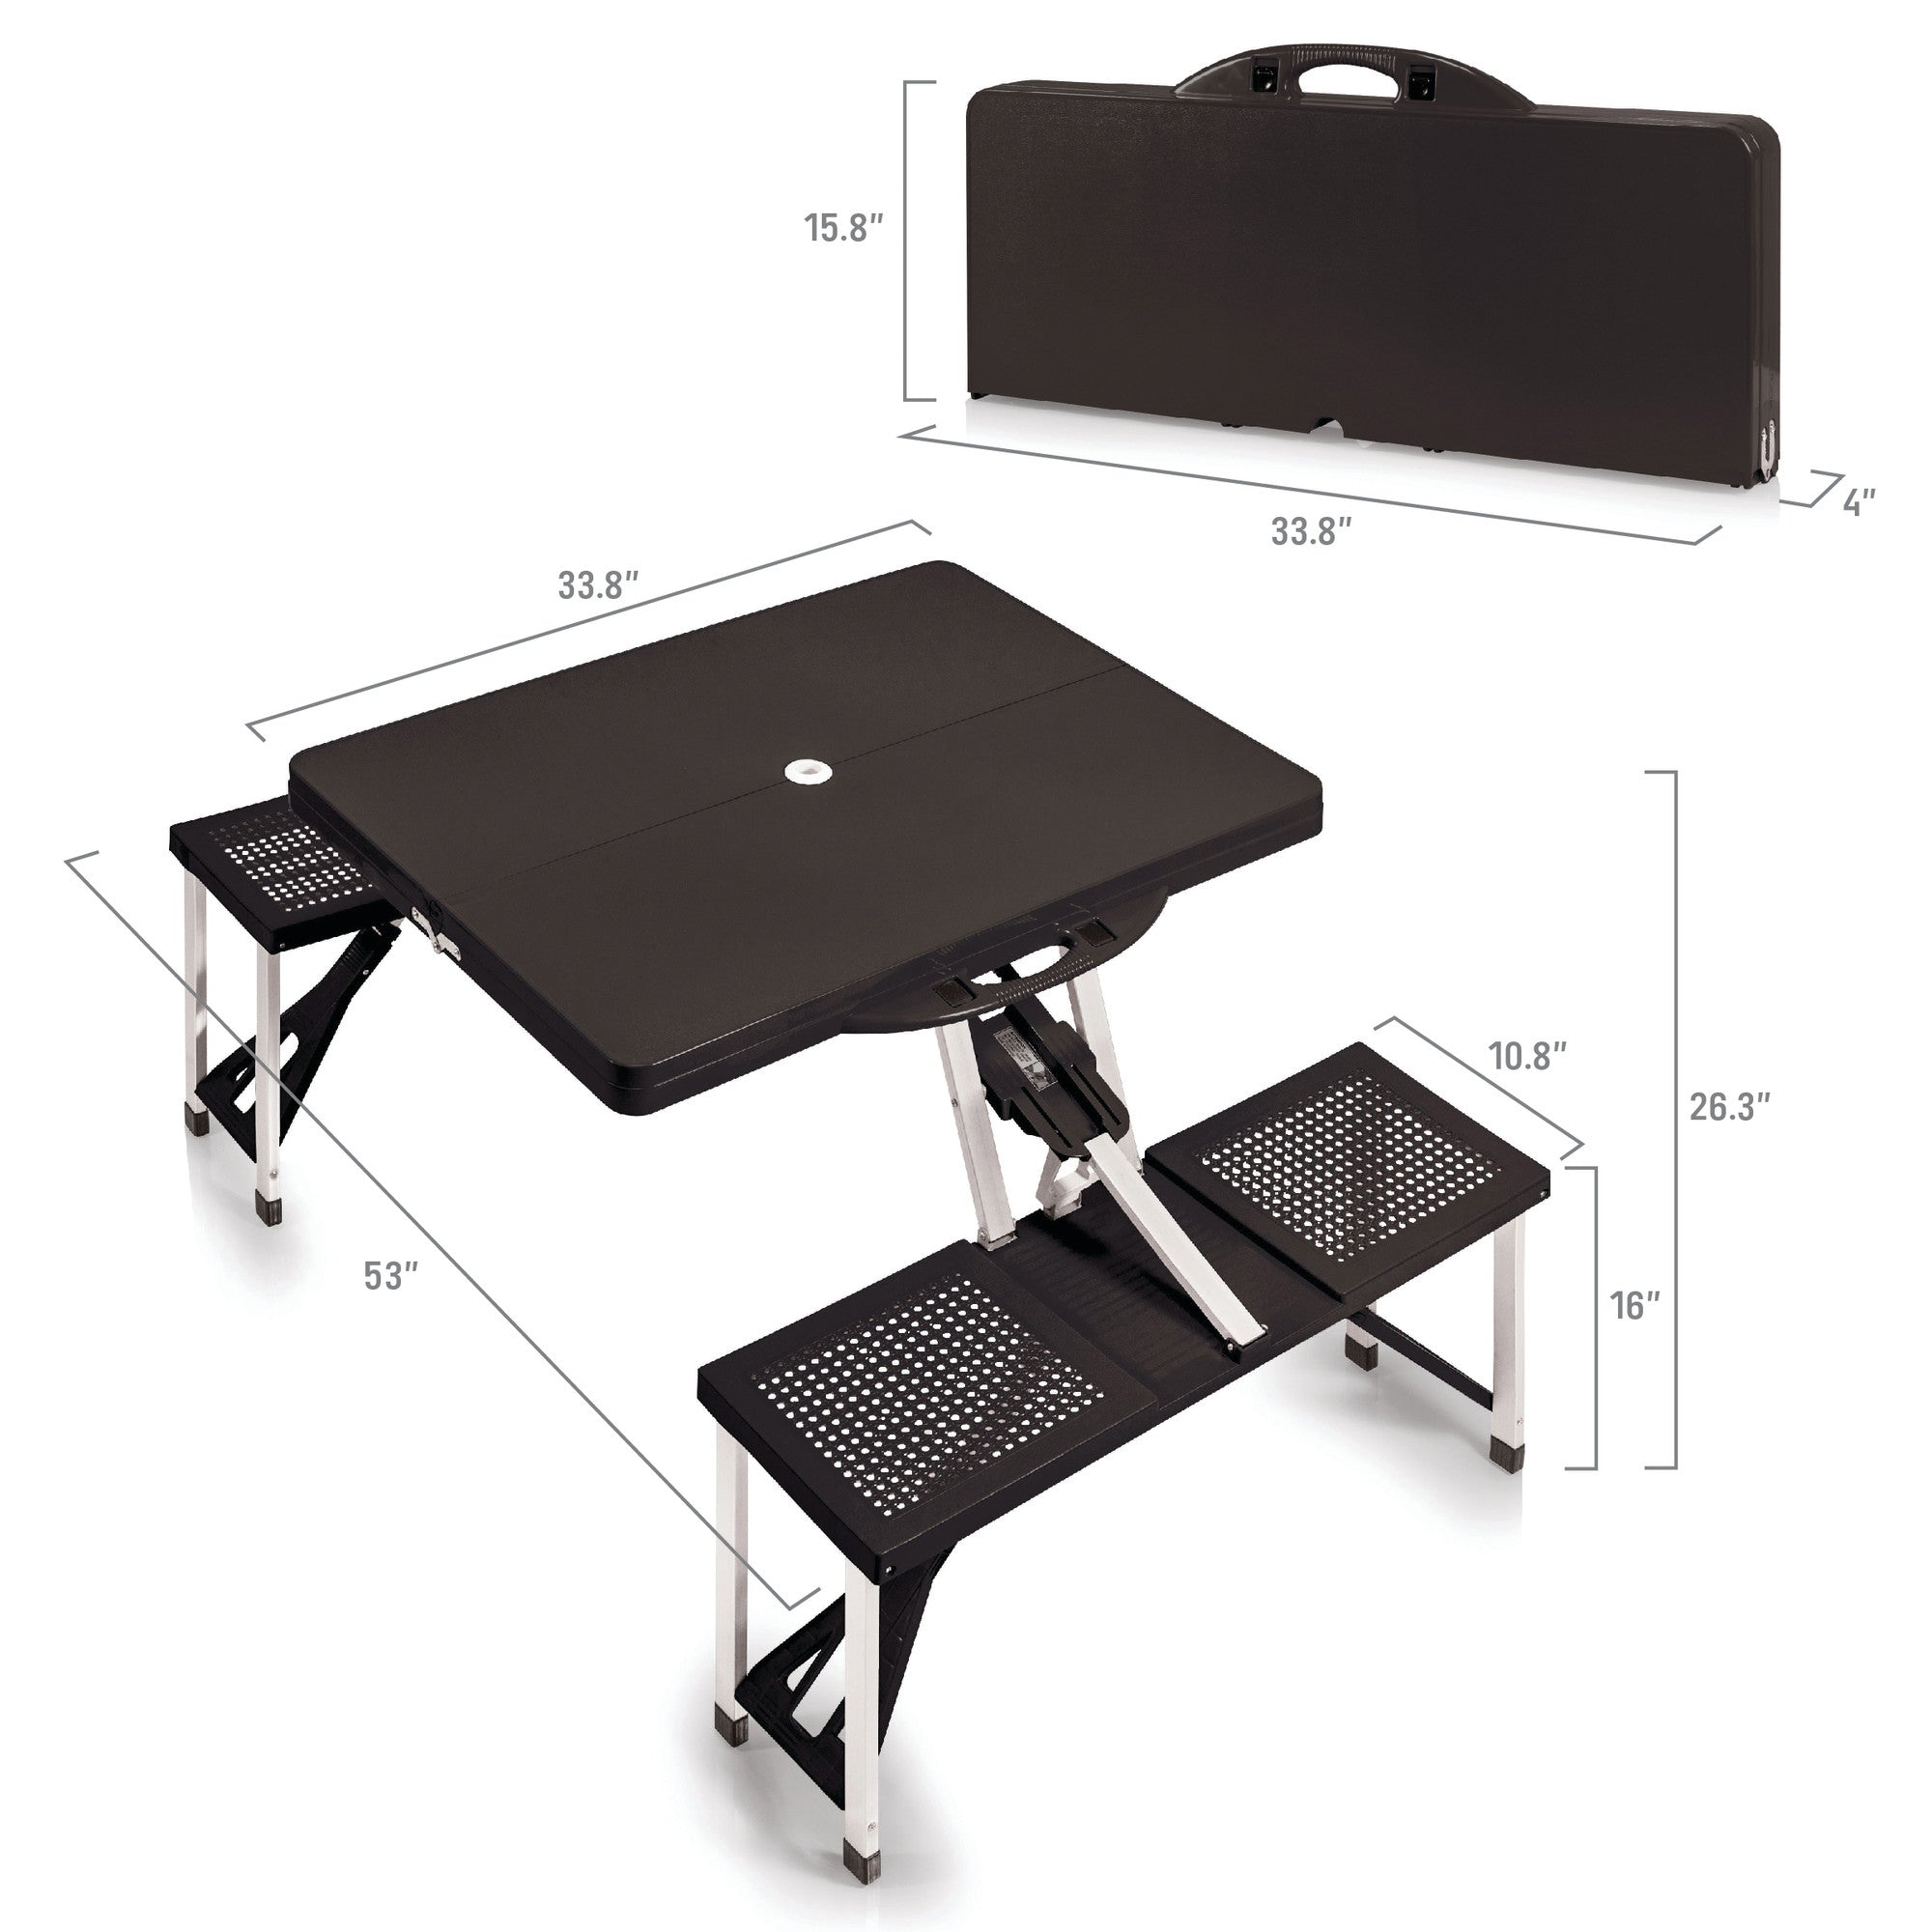 Hockey Rink - Los Angeles Kings - Picnic Table Portable Folding Table with Seats